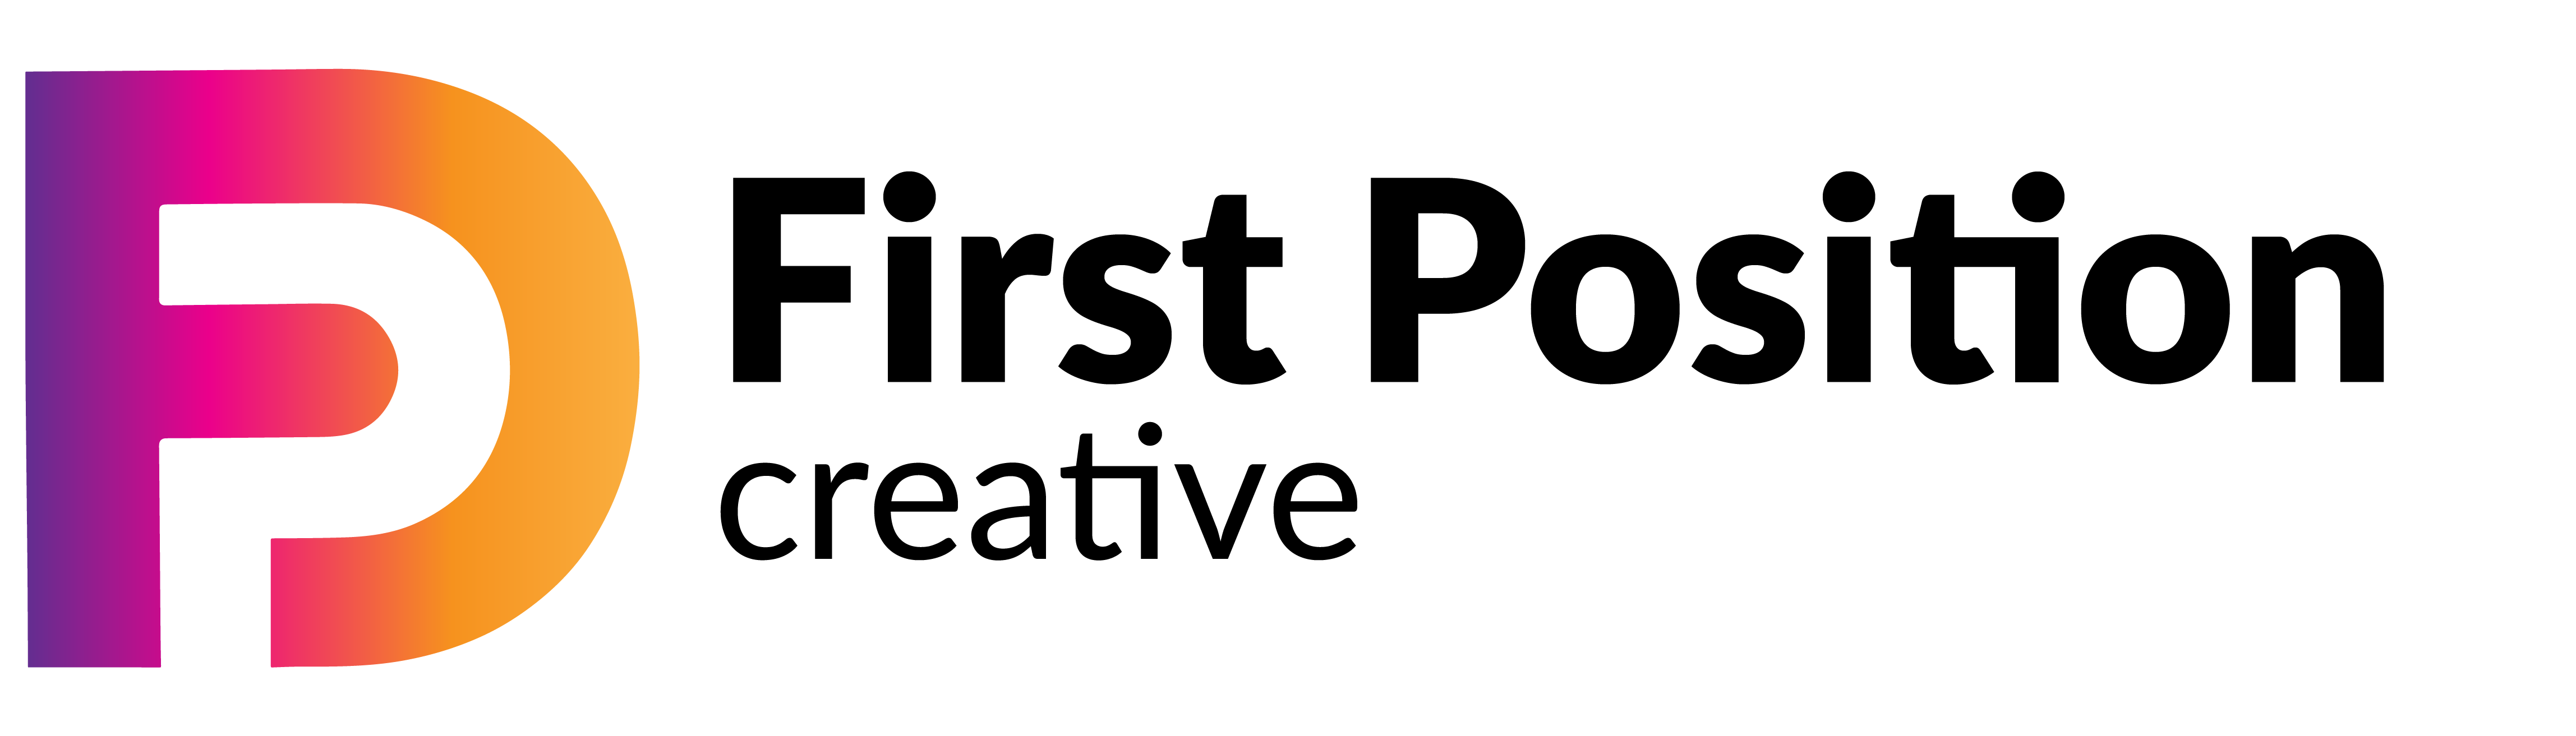 First Position Creative